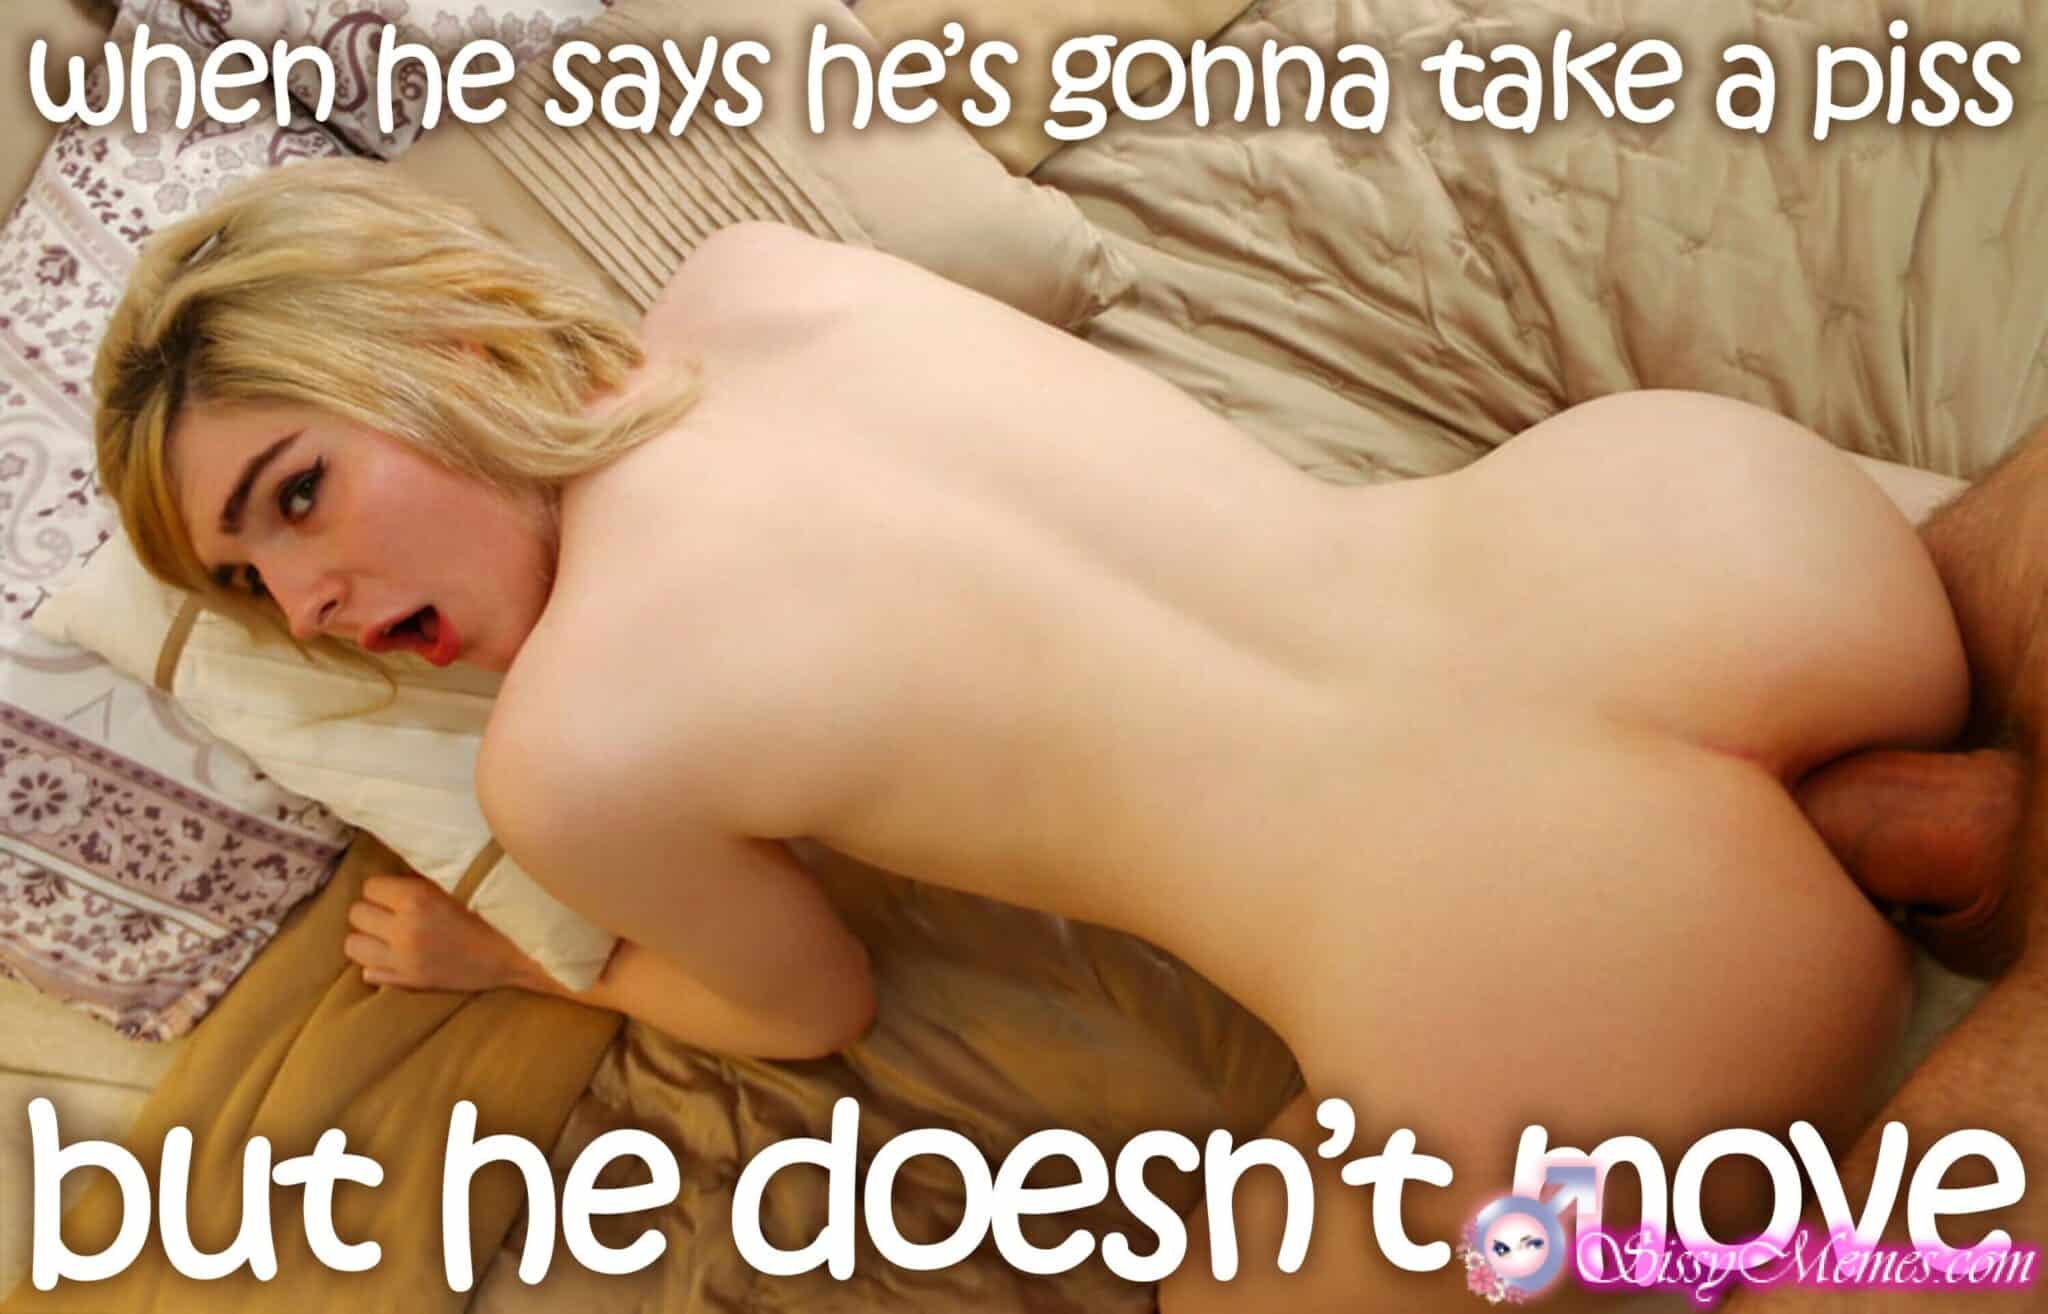 Femboy Daddy Anal sissy caption: when he says he’s gonna take a piss but he doesn’t move Guy Fucks Blonde Girlyboys Ass